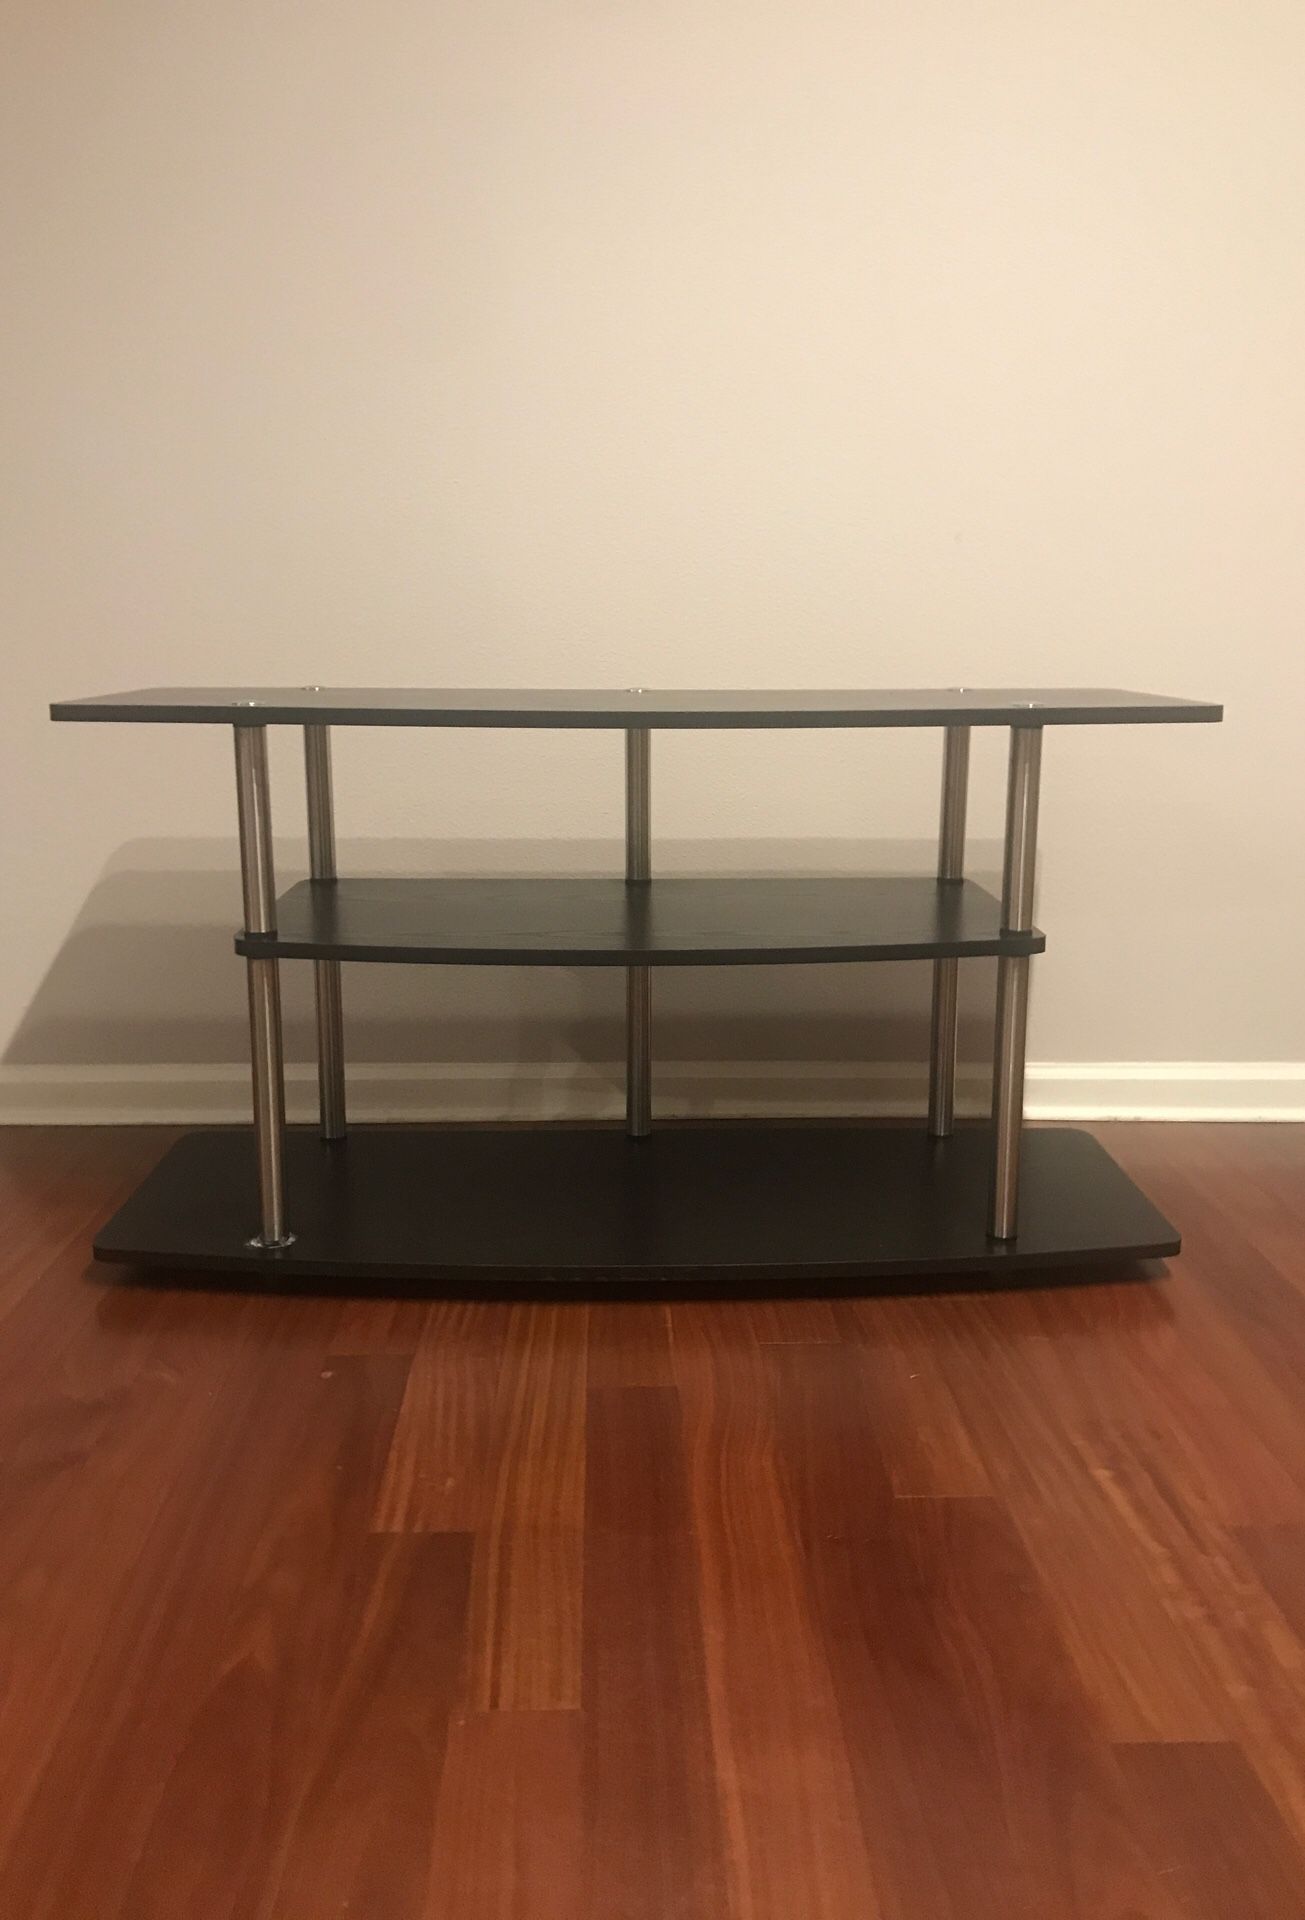 42” TV STAND